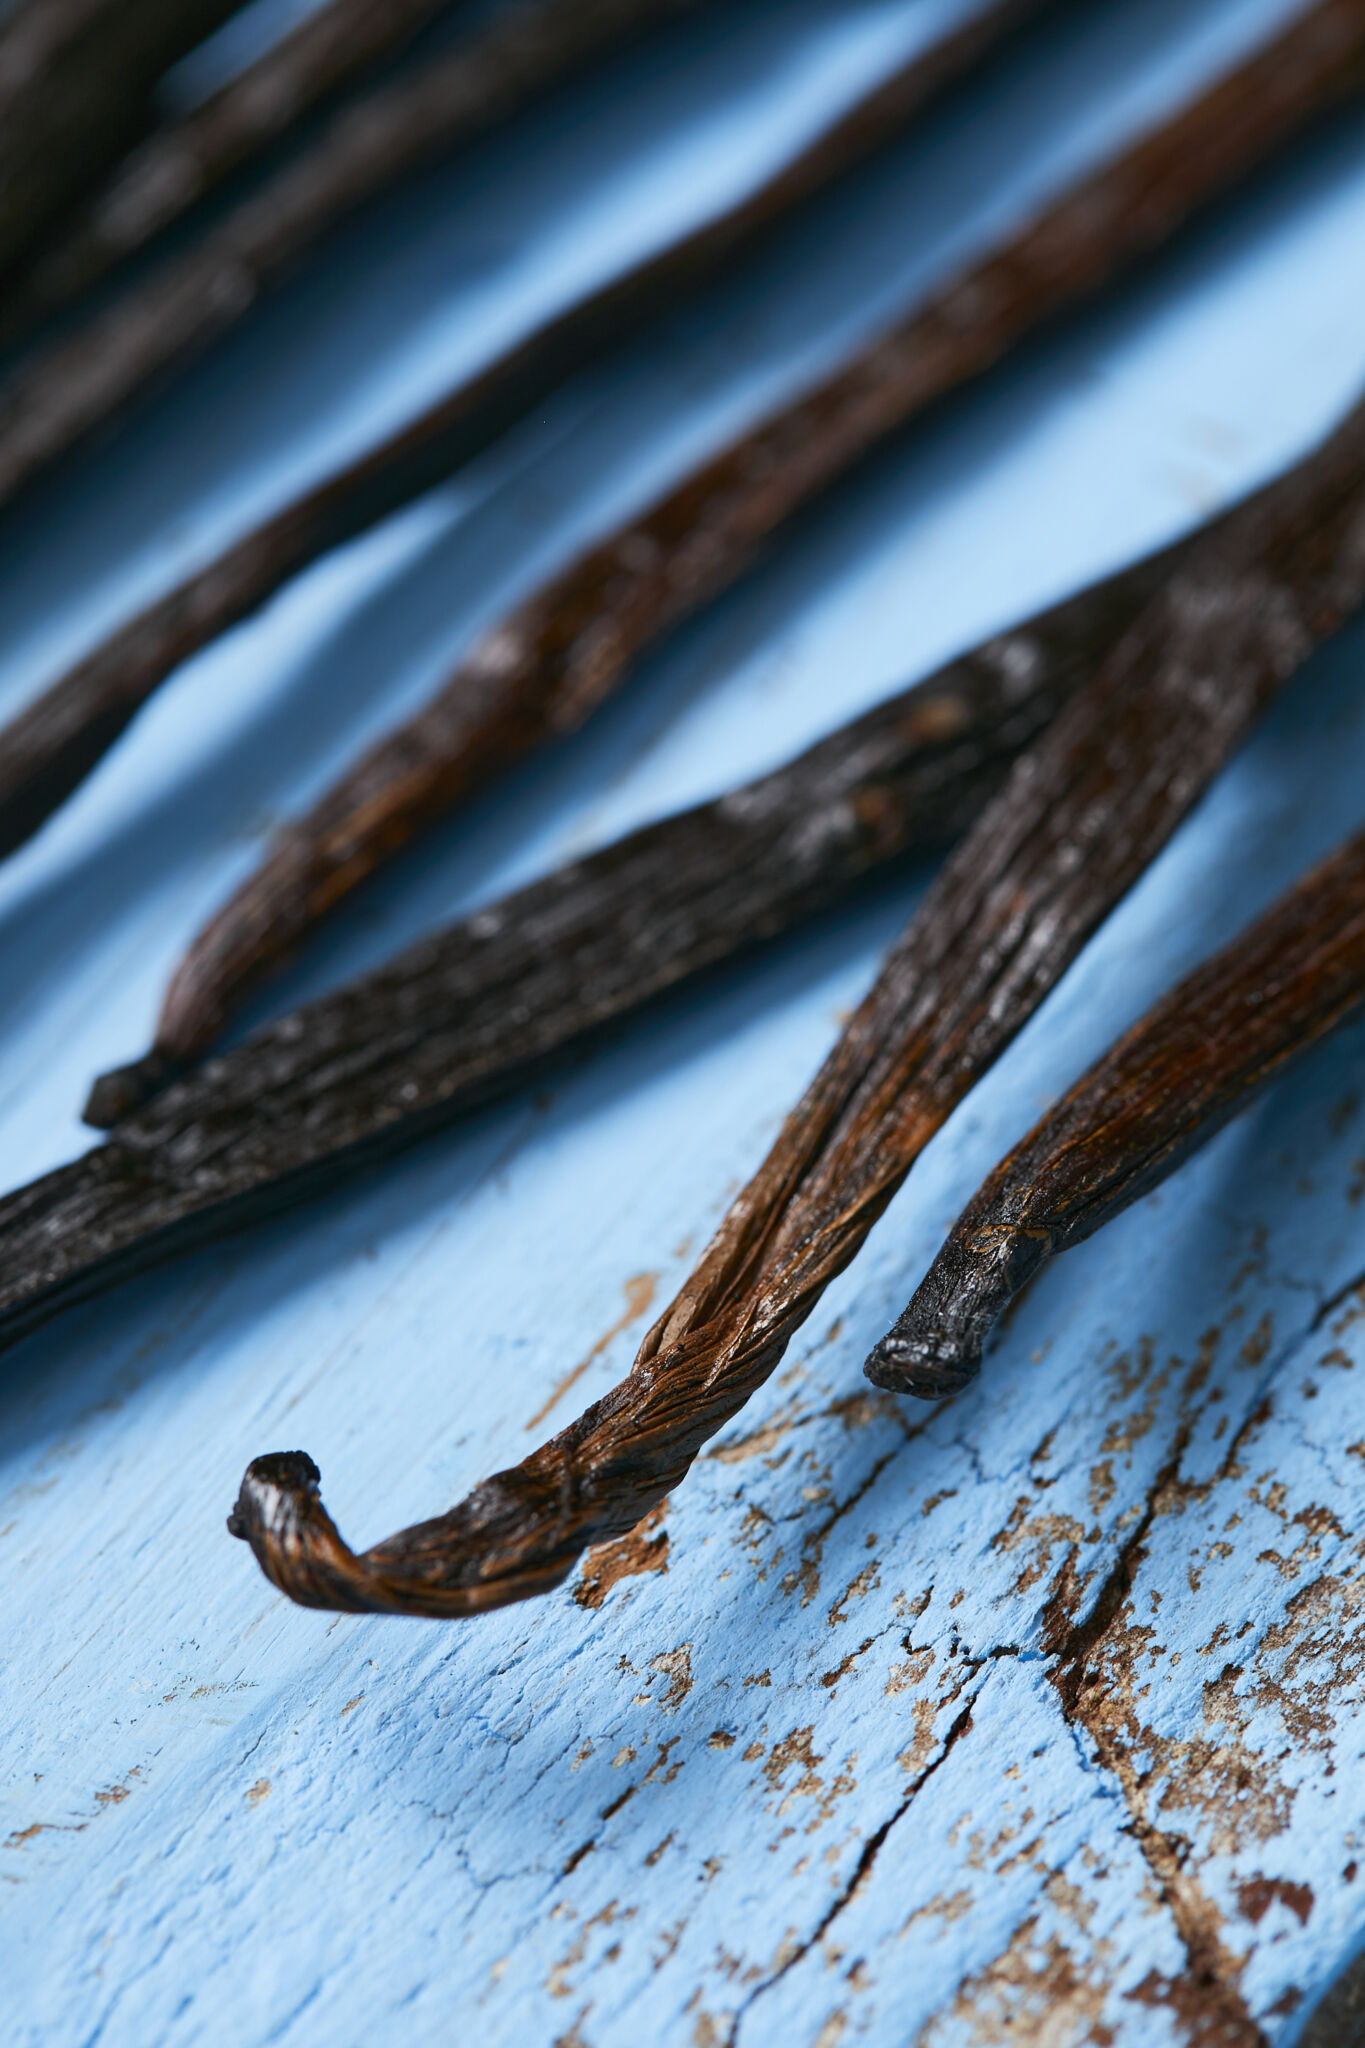 Vanilla beans are on a blue wooden surface. The bean pods are in a long, slender shape, have a dark blackish-brown color and a glossy appearance. 